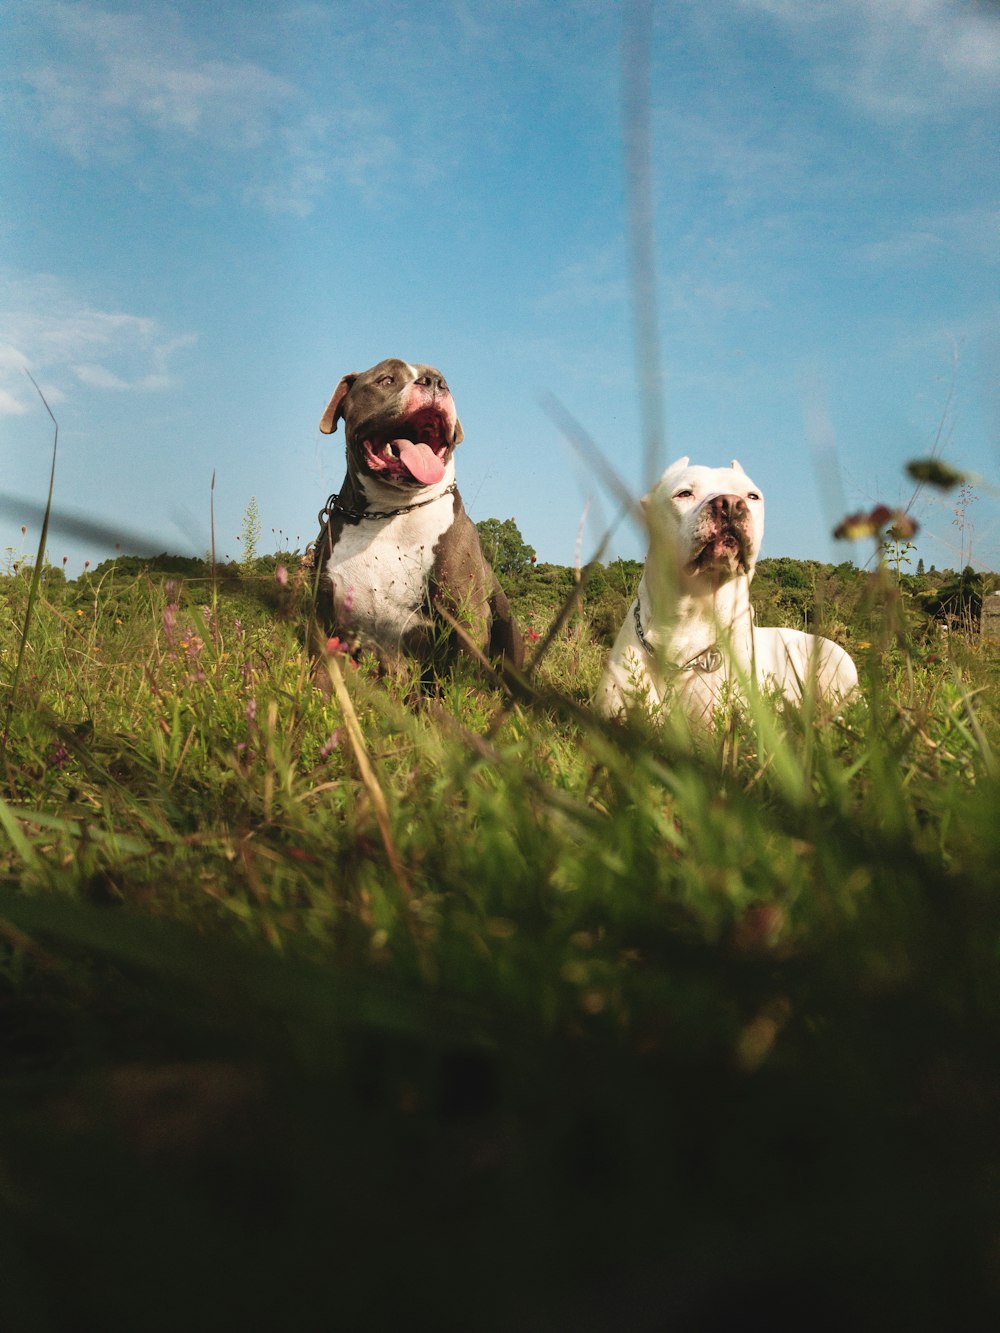 two dogs sitting in a grassy field